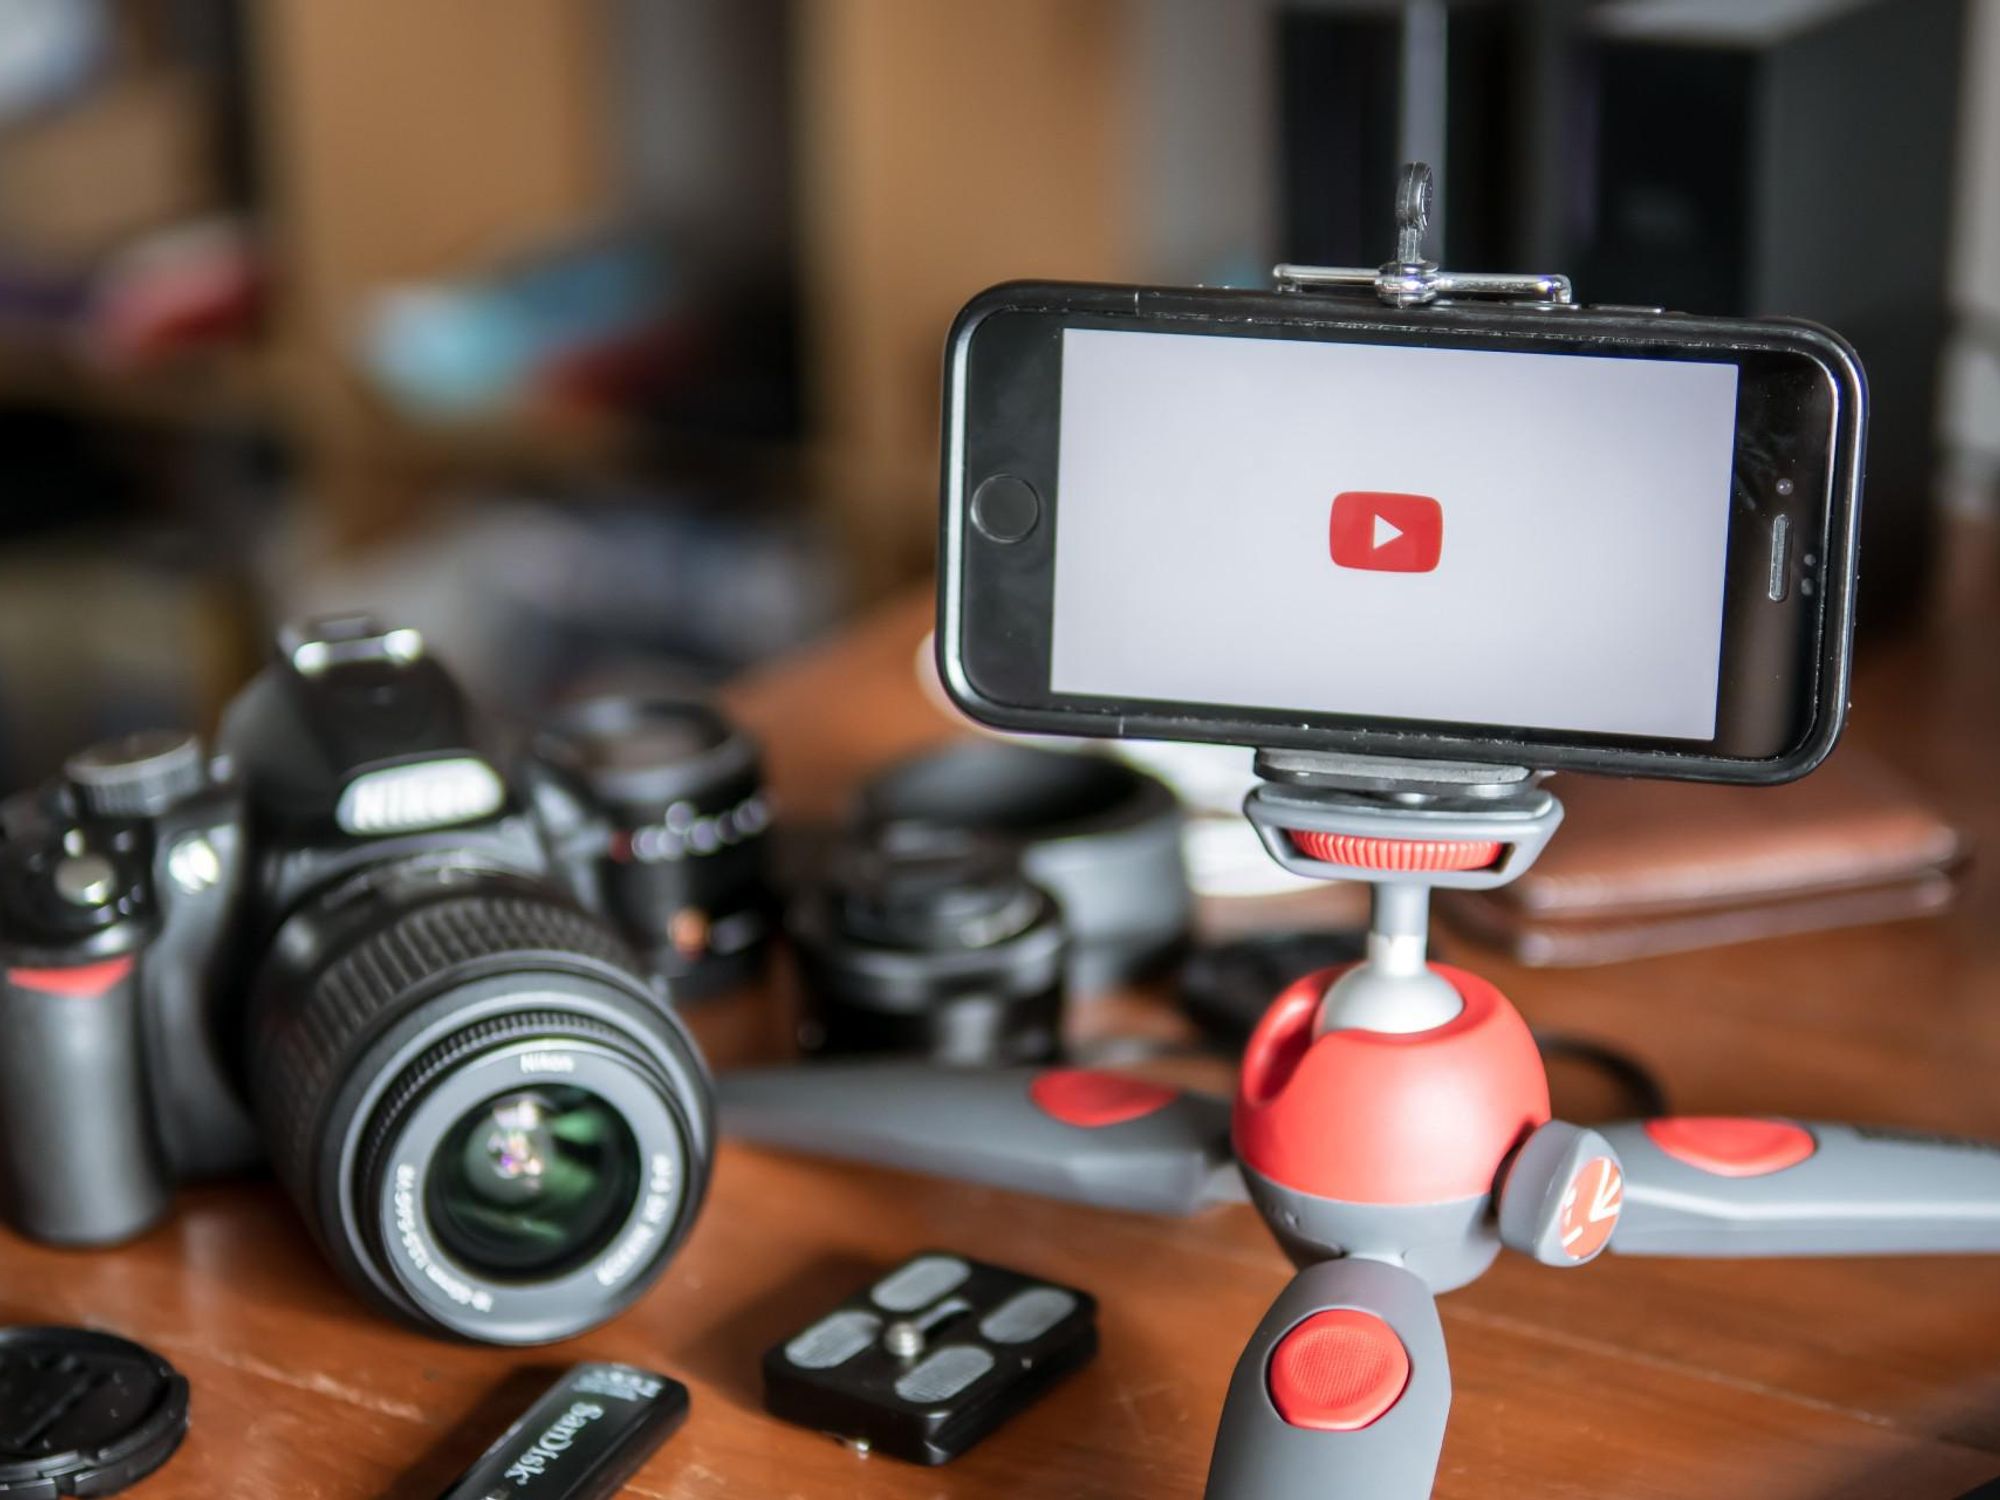 Spotter Raises $200 Million To License YouTubers’ Old Videos